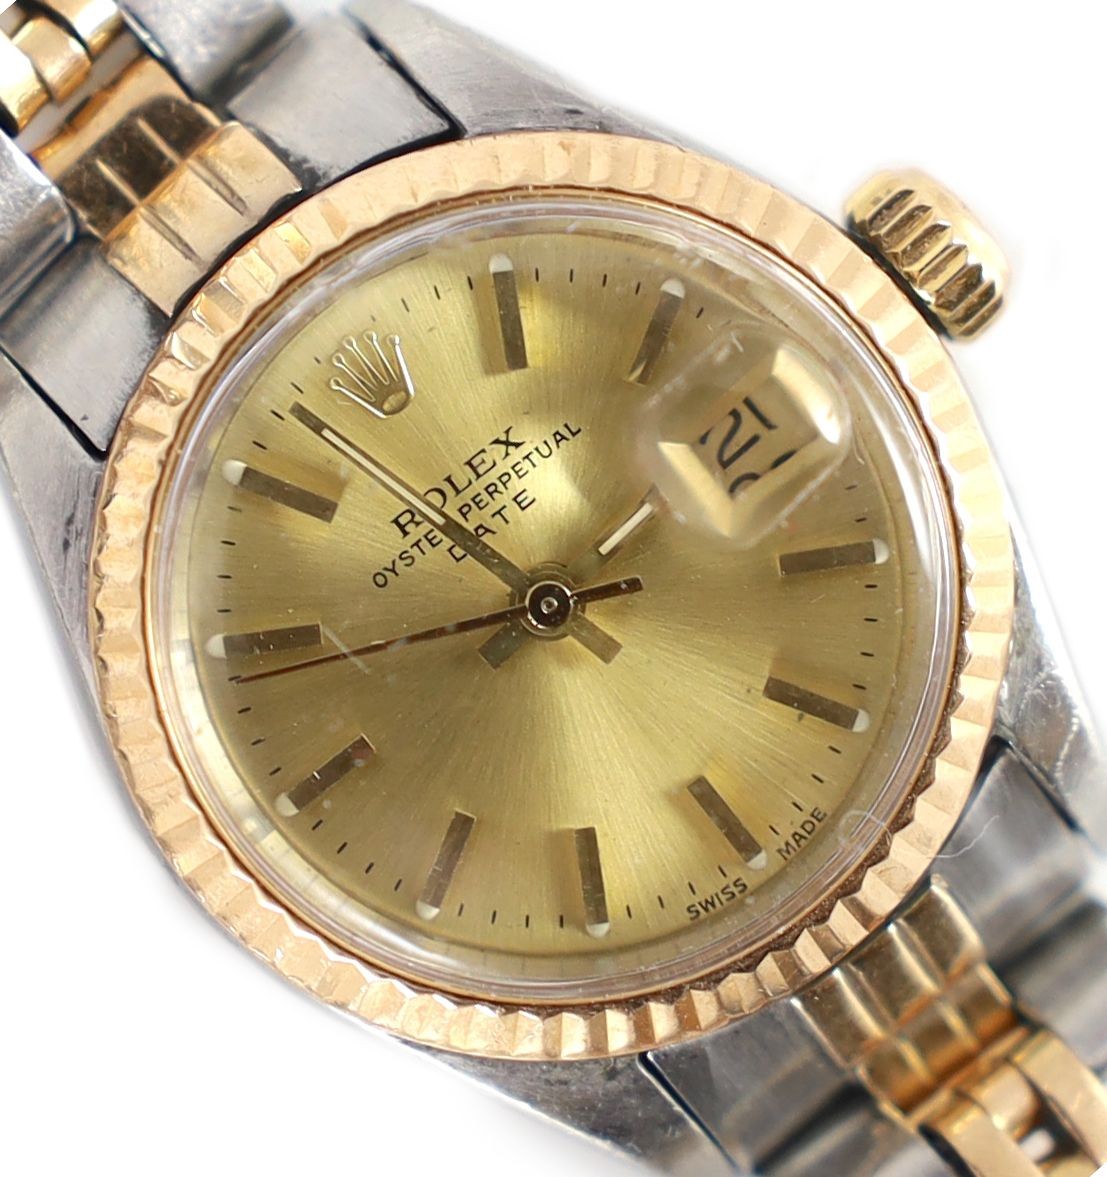 A lady's 1970's steel and gold Rolex Oyster Perpetual Date wrist watch, on a Rolex steel and gold bracelet